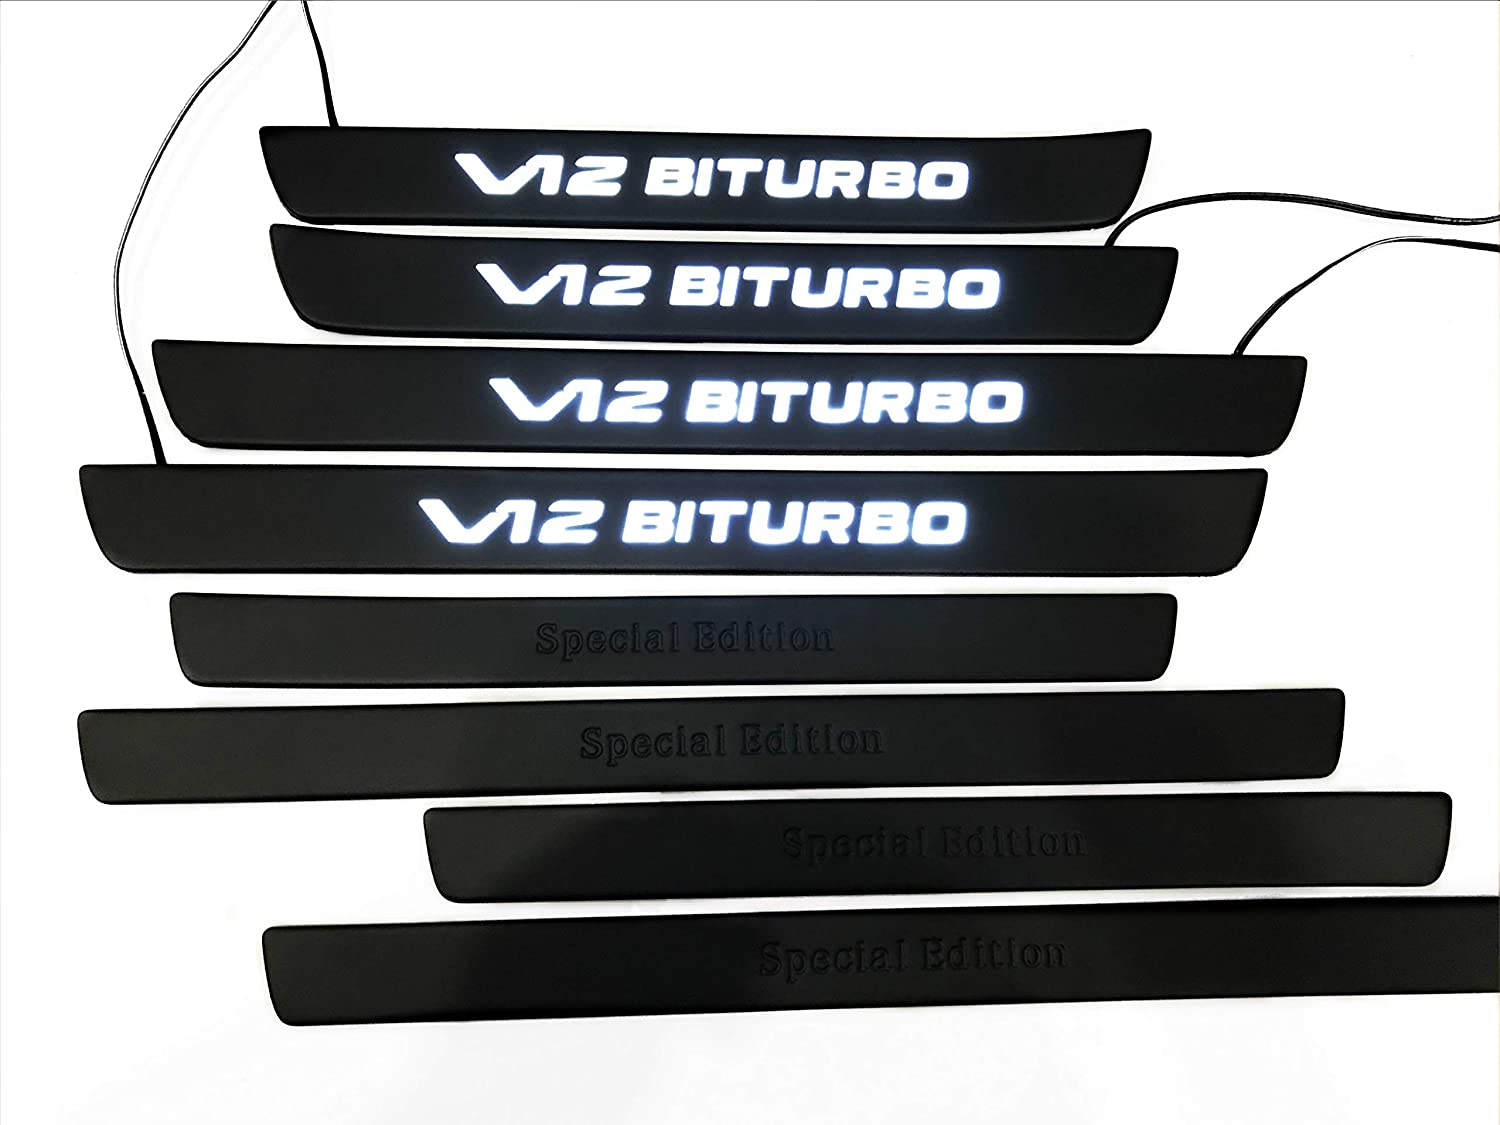 Mercedes-Benz Compatible with V12 Biturbo Special Edition W222 S222 S63 S500 S550 S65 S Class Entrance mouldings LED Illuminated Door Sills Interior Trim Set Stainless Steel Black Matte White Sign